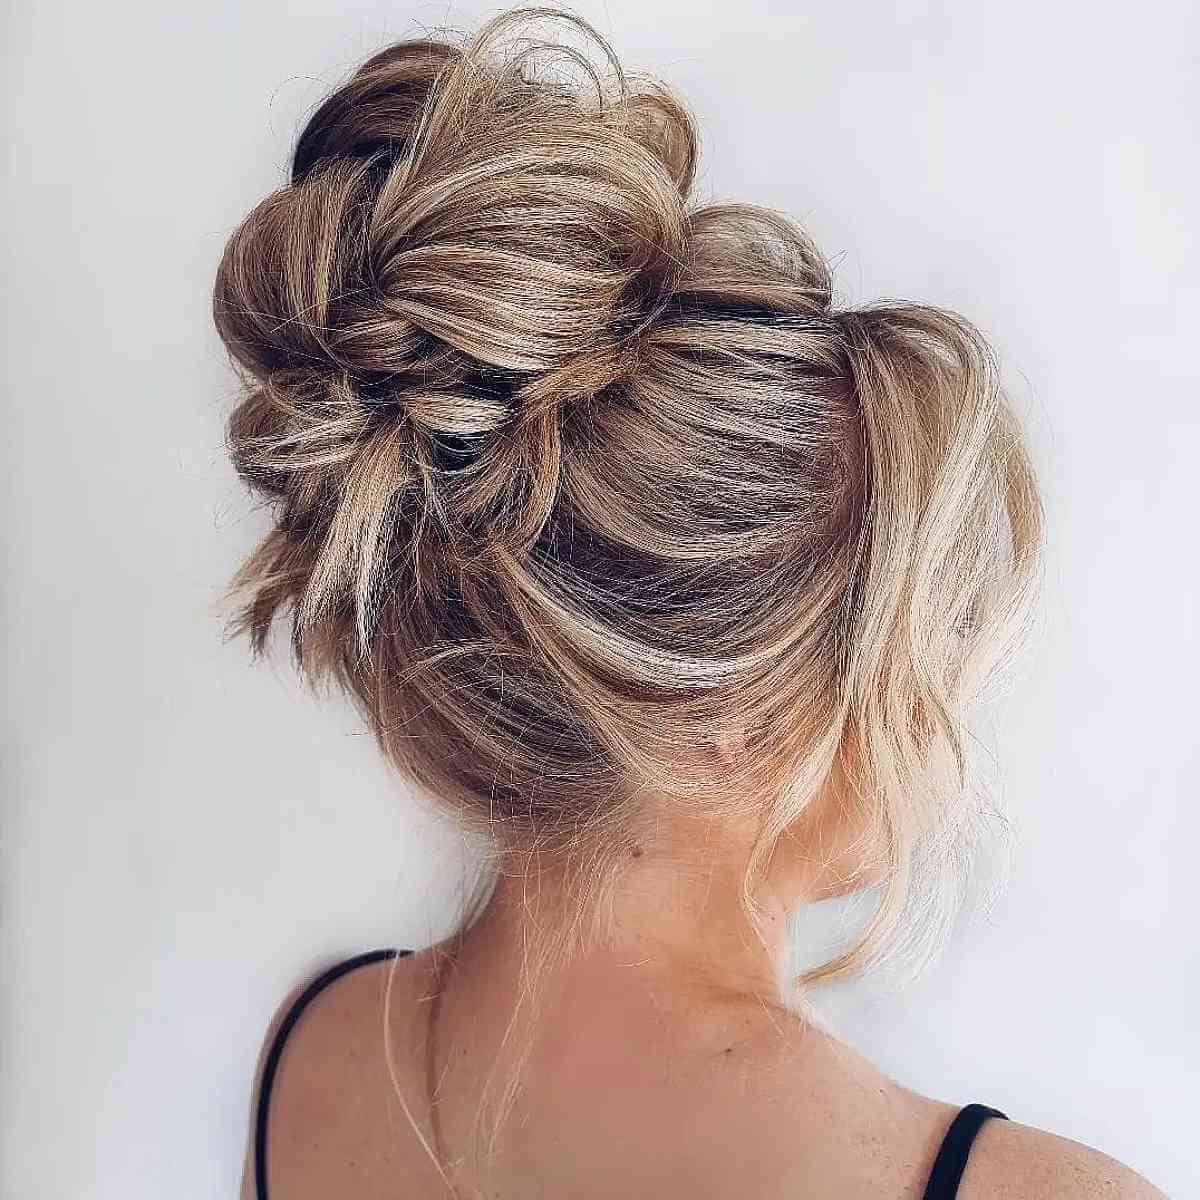 How To Get The Messy Bun Hairstyle | Femina.in